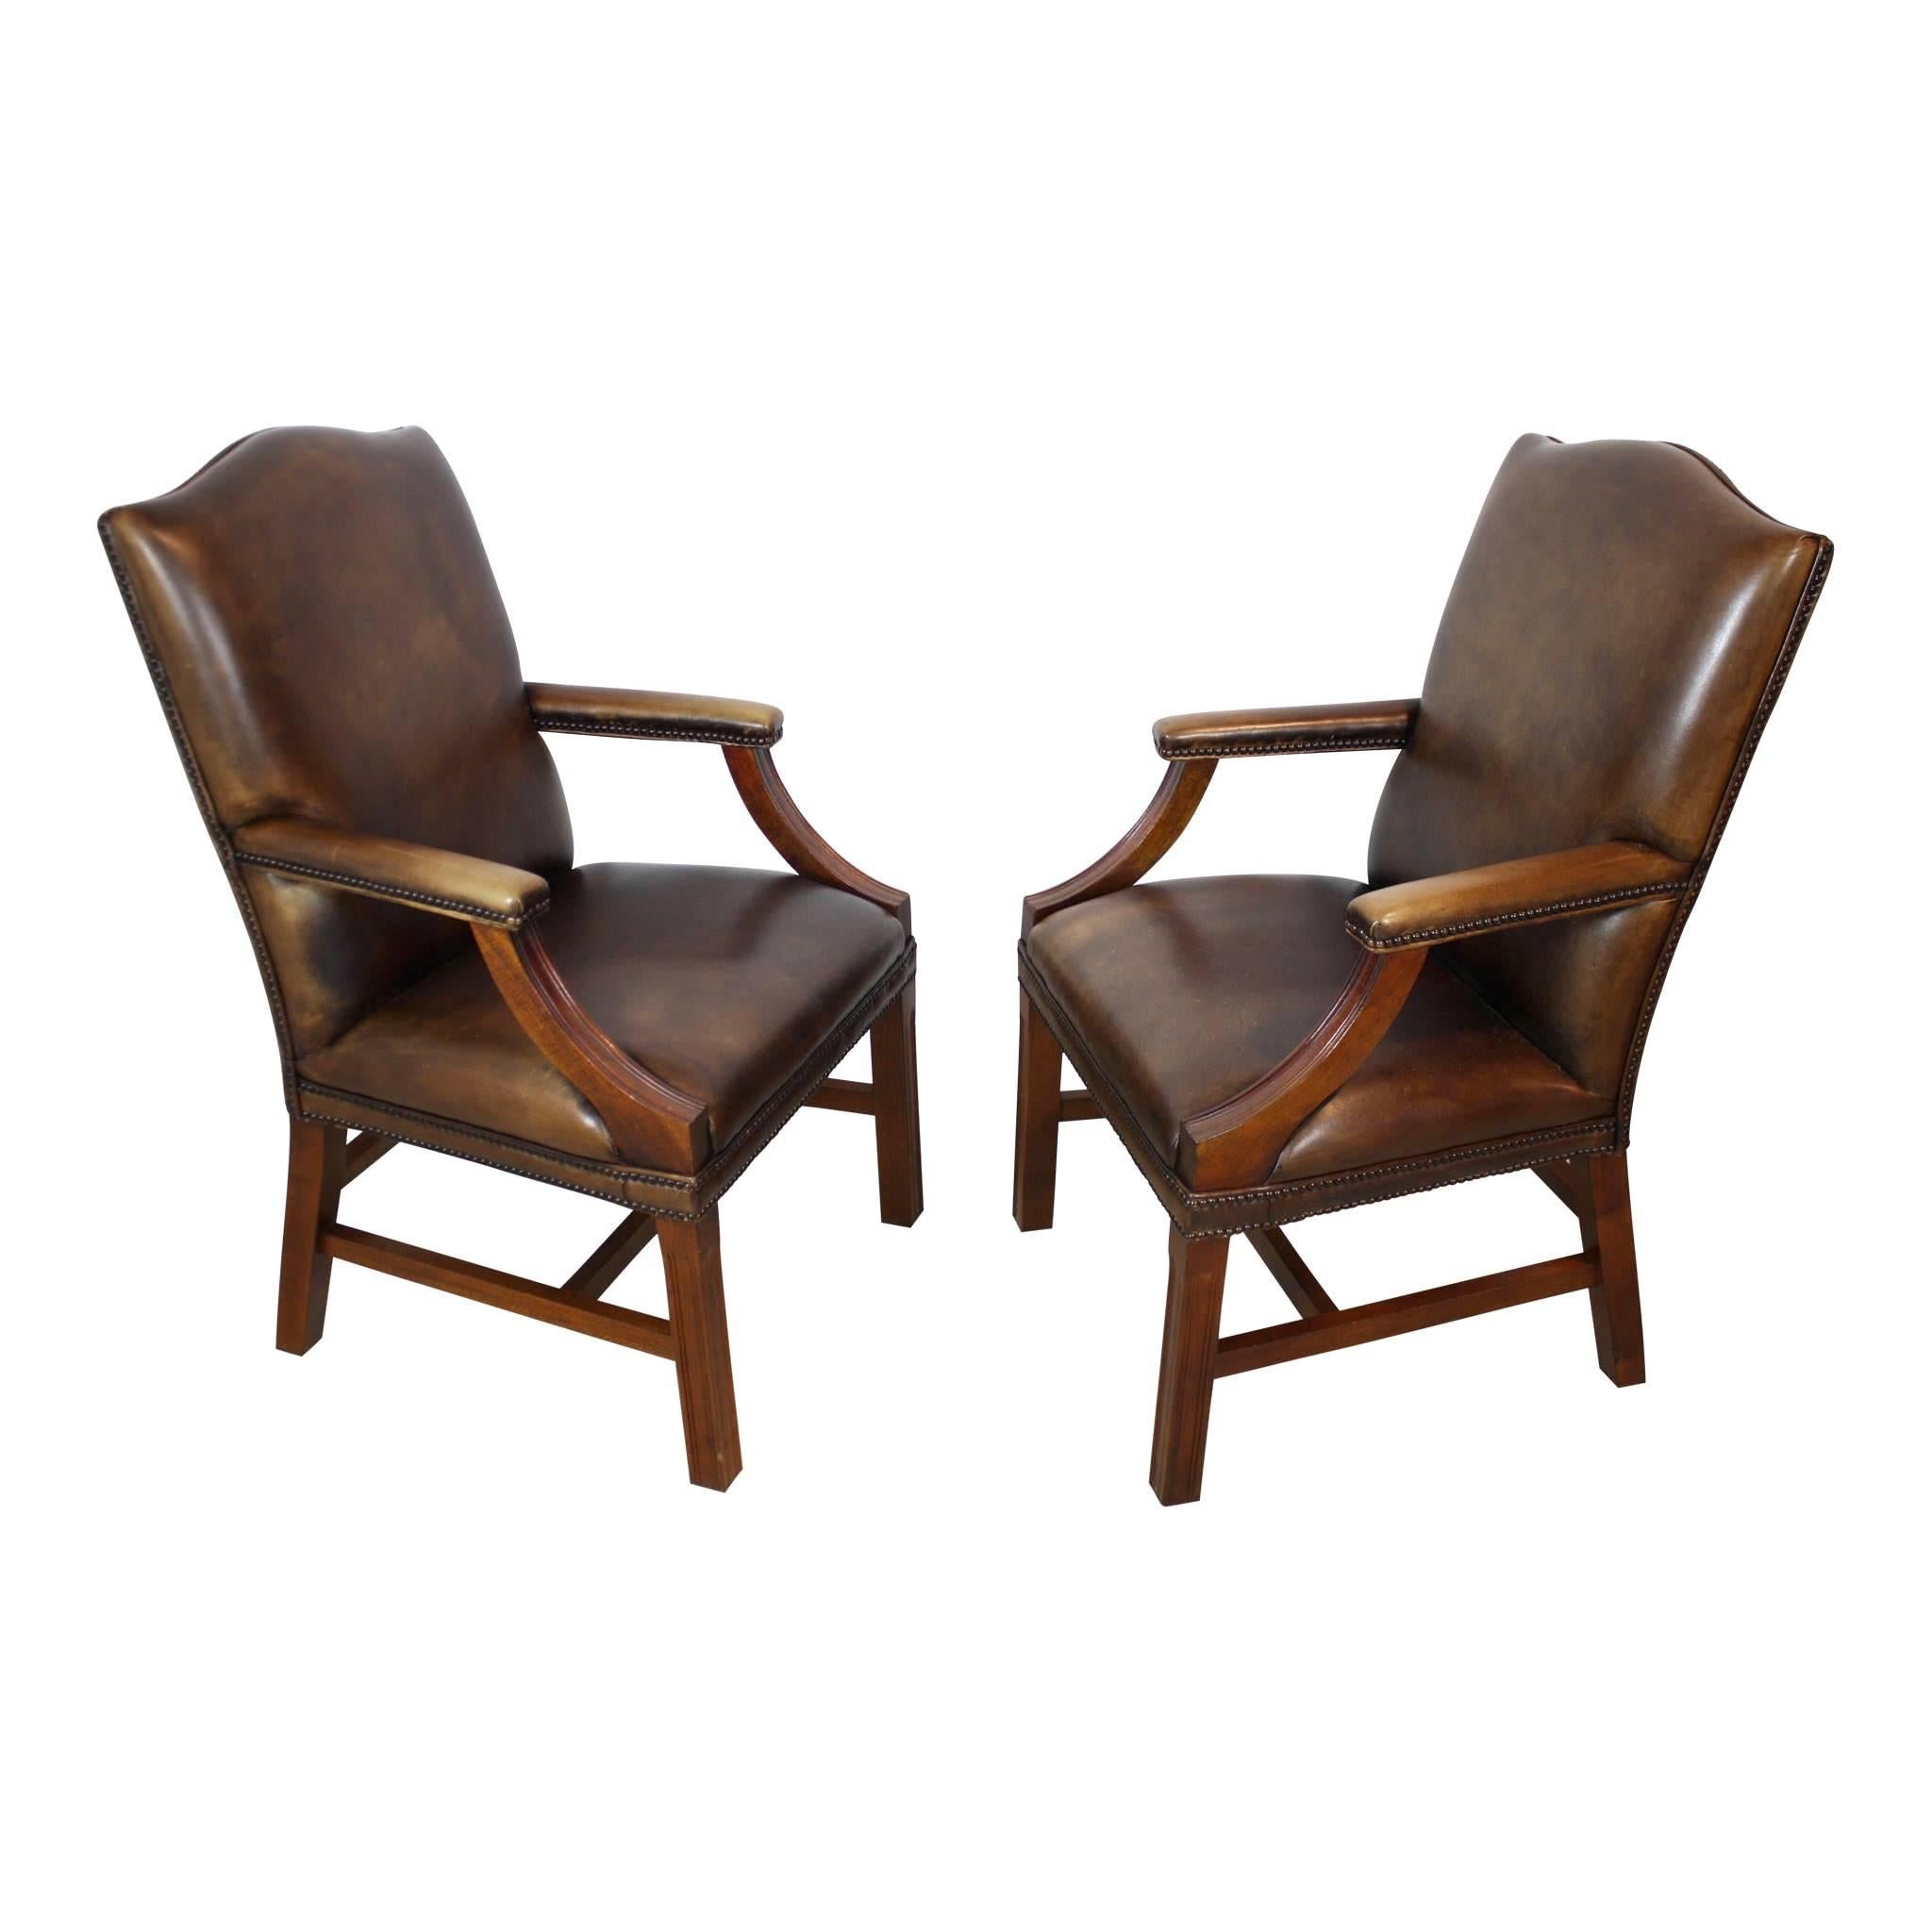 Two, dark brown, arched back leather chairs are coupled with generous, deep seats and padded leather armrests. The sturdy, well cared for leather, is secured with brass pinning and has a beautiful patina from years of use.